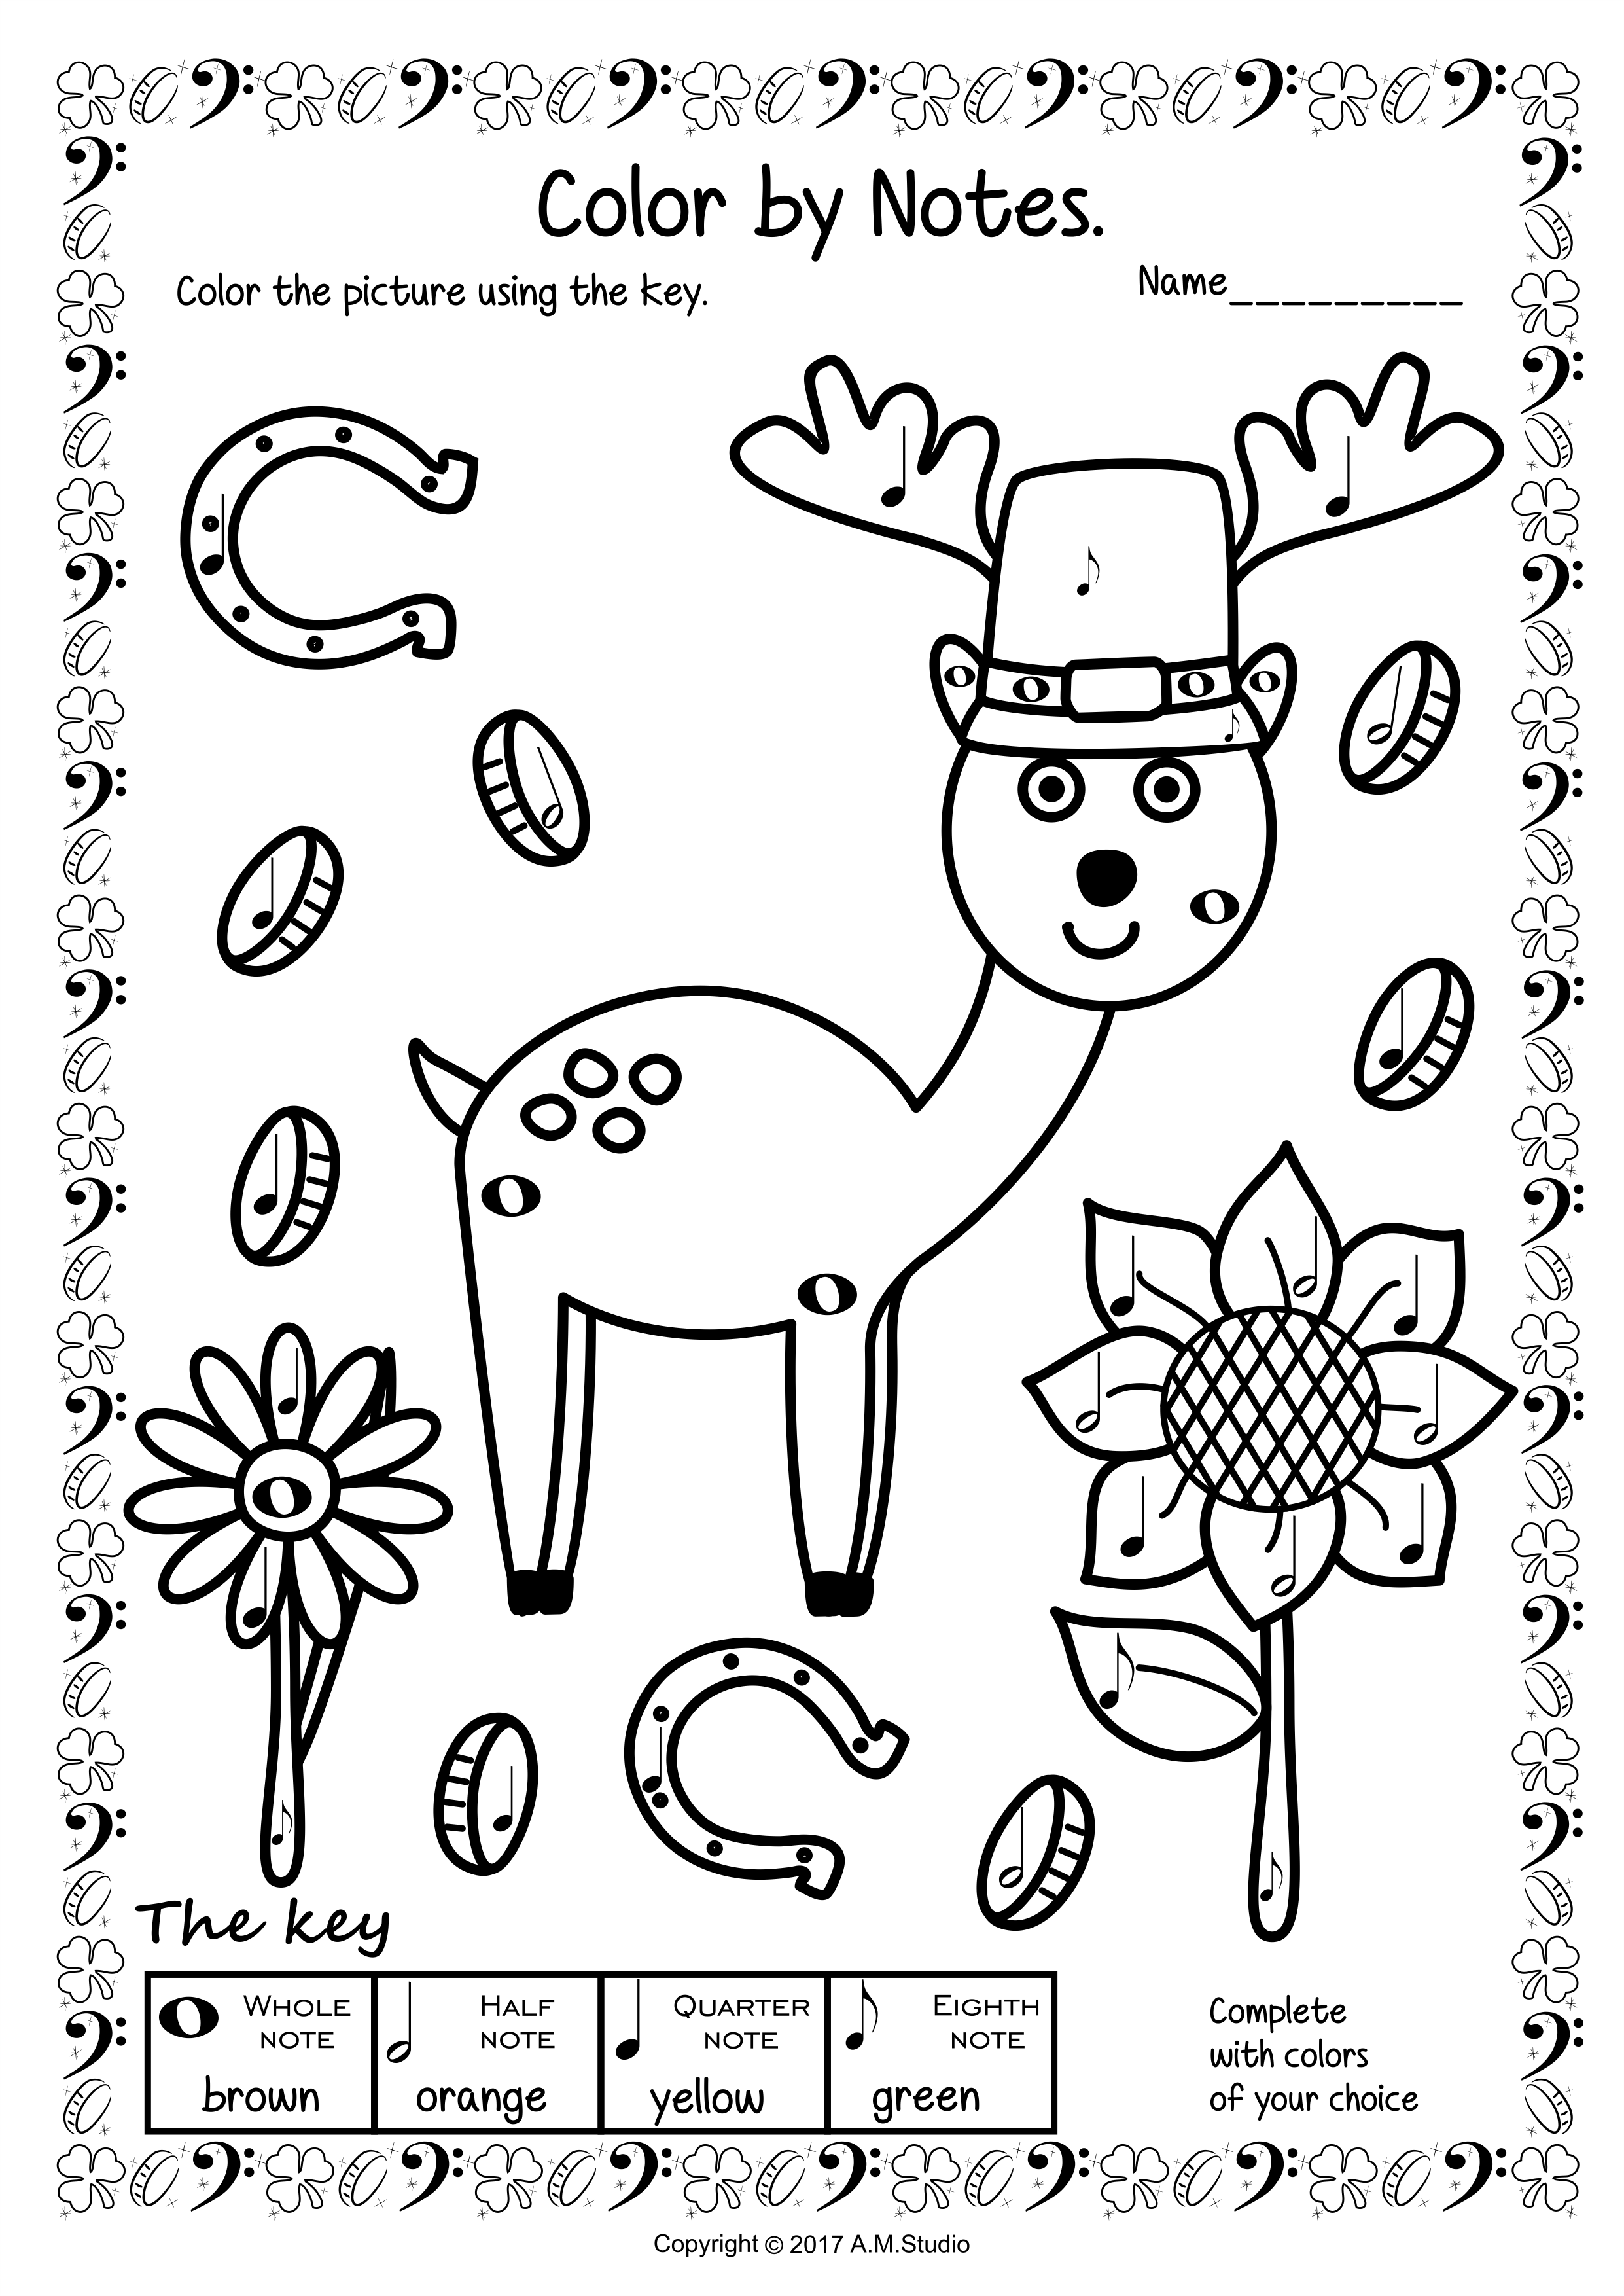 St. Patrick`s Day Music Coloring Worksheets (img # 2)